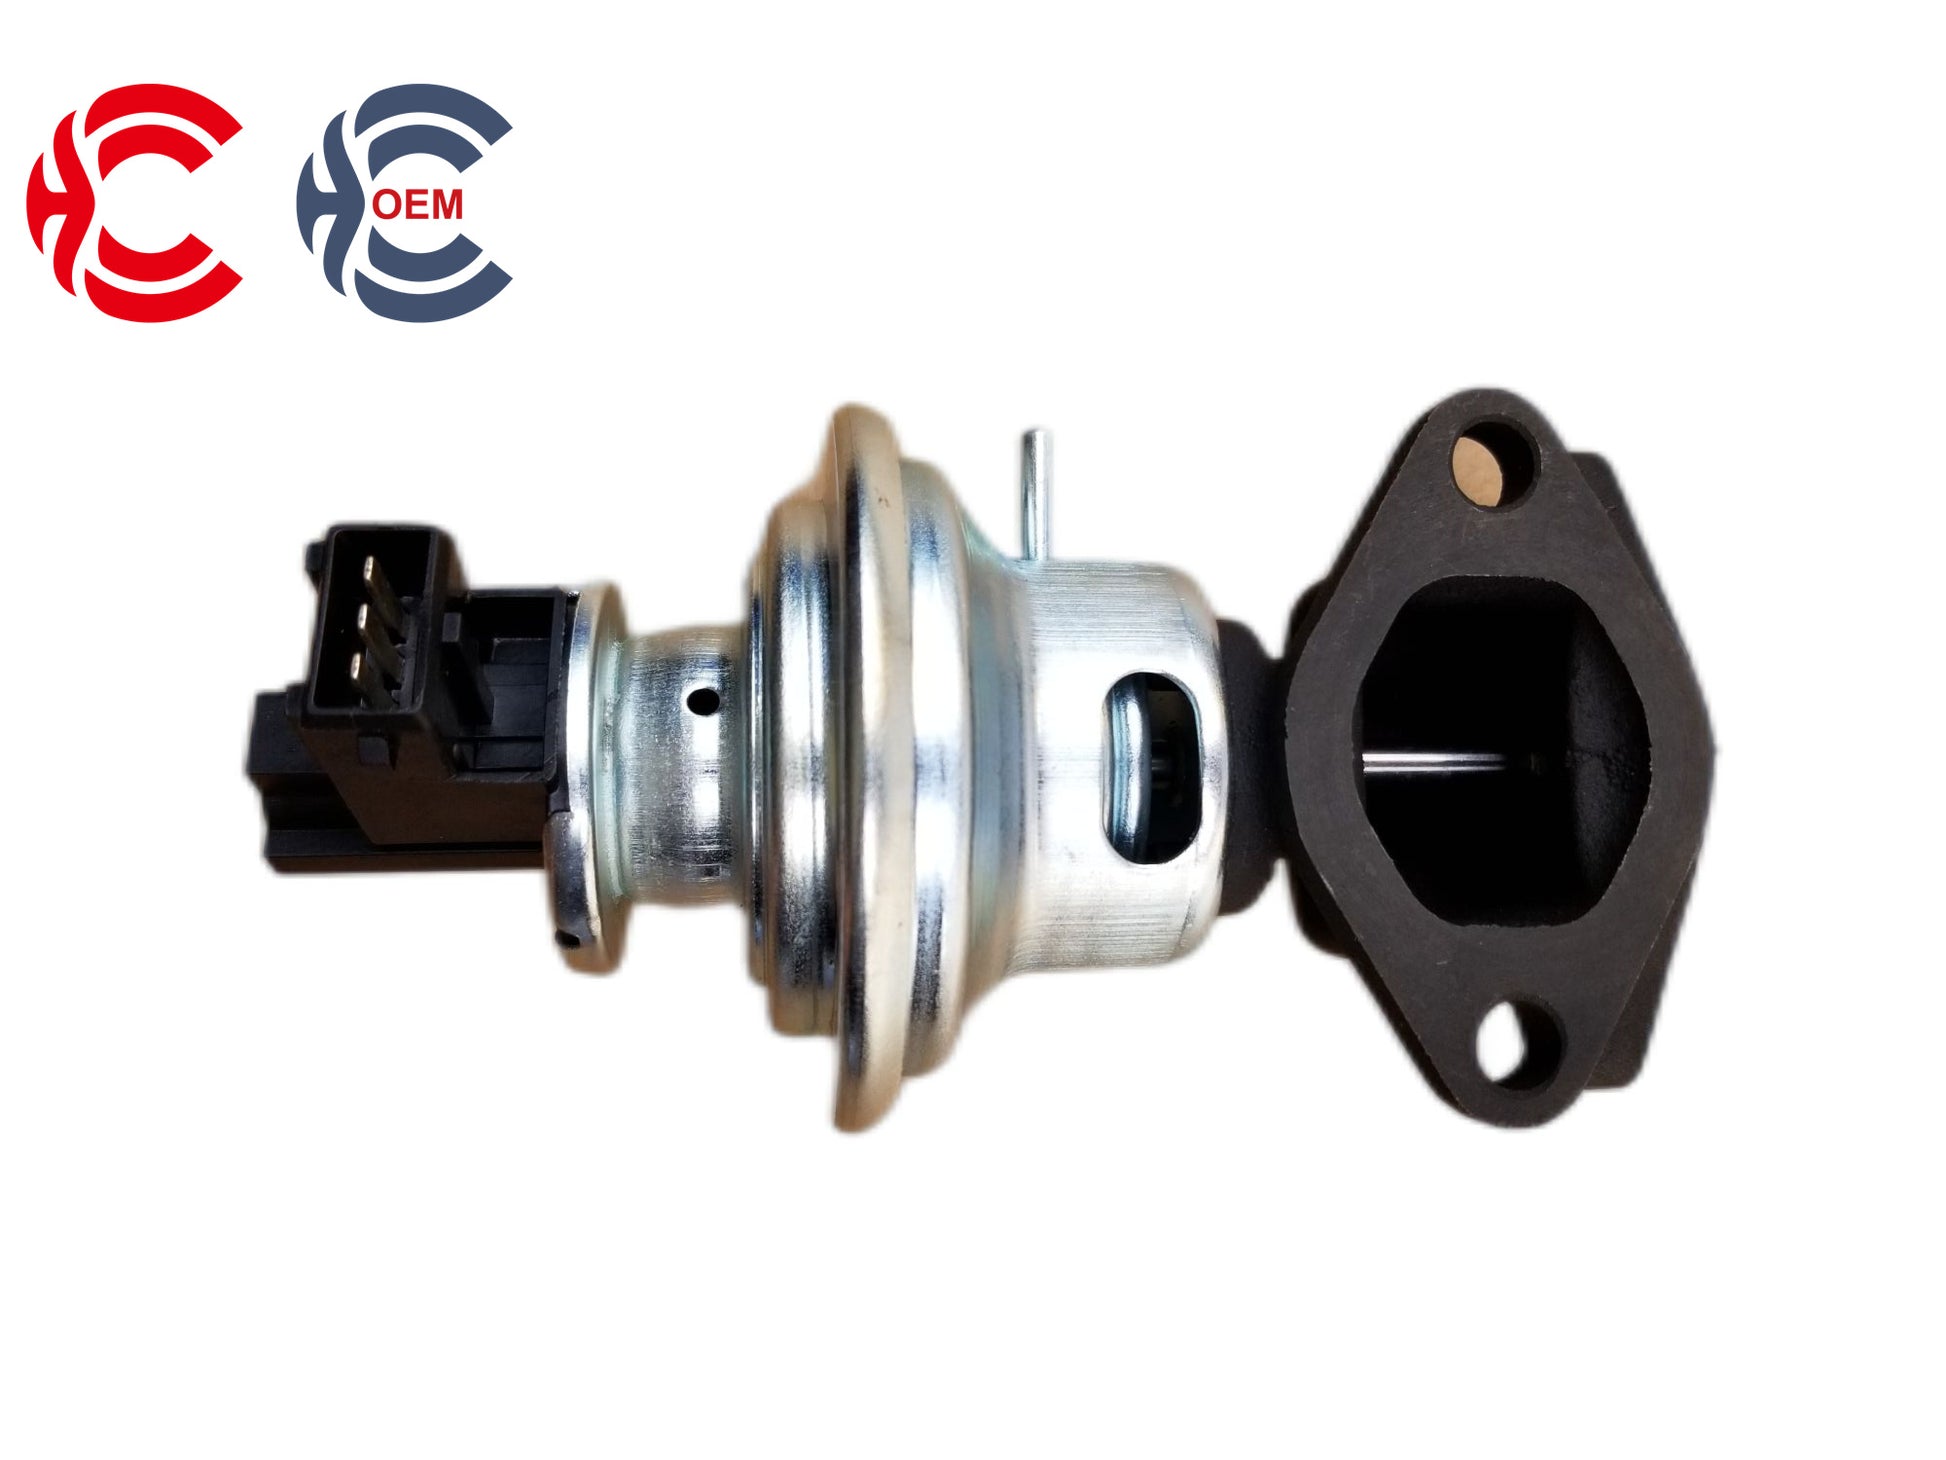 OEM: 1000620823Material: ABS MetalColor: black silver goldenOrigin: Made in ChinaWeight: 1000gPacking List: 1* Exhaust Gas Recirculation Valve More ServiceWe can provide OEM Manufacturing serviceWe can Be your one-step solution for Auto PartsWe can provide technical scheme for you Feel Free to Contact Us, We will get back to you as soon as possible.